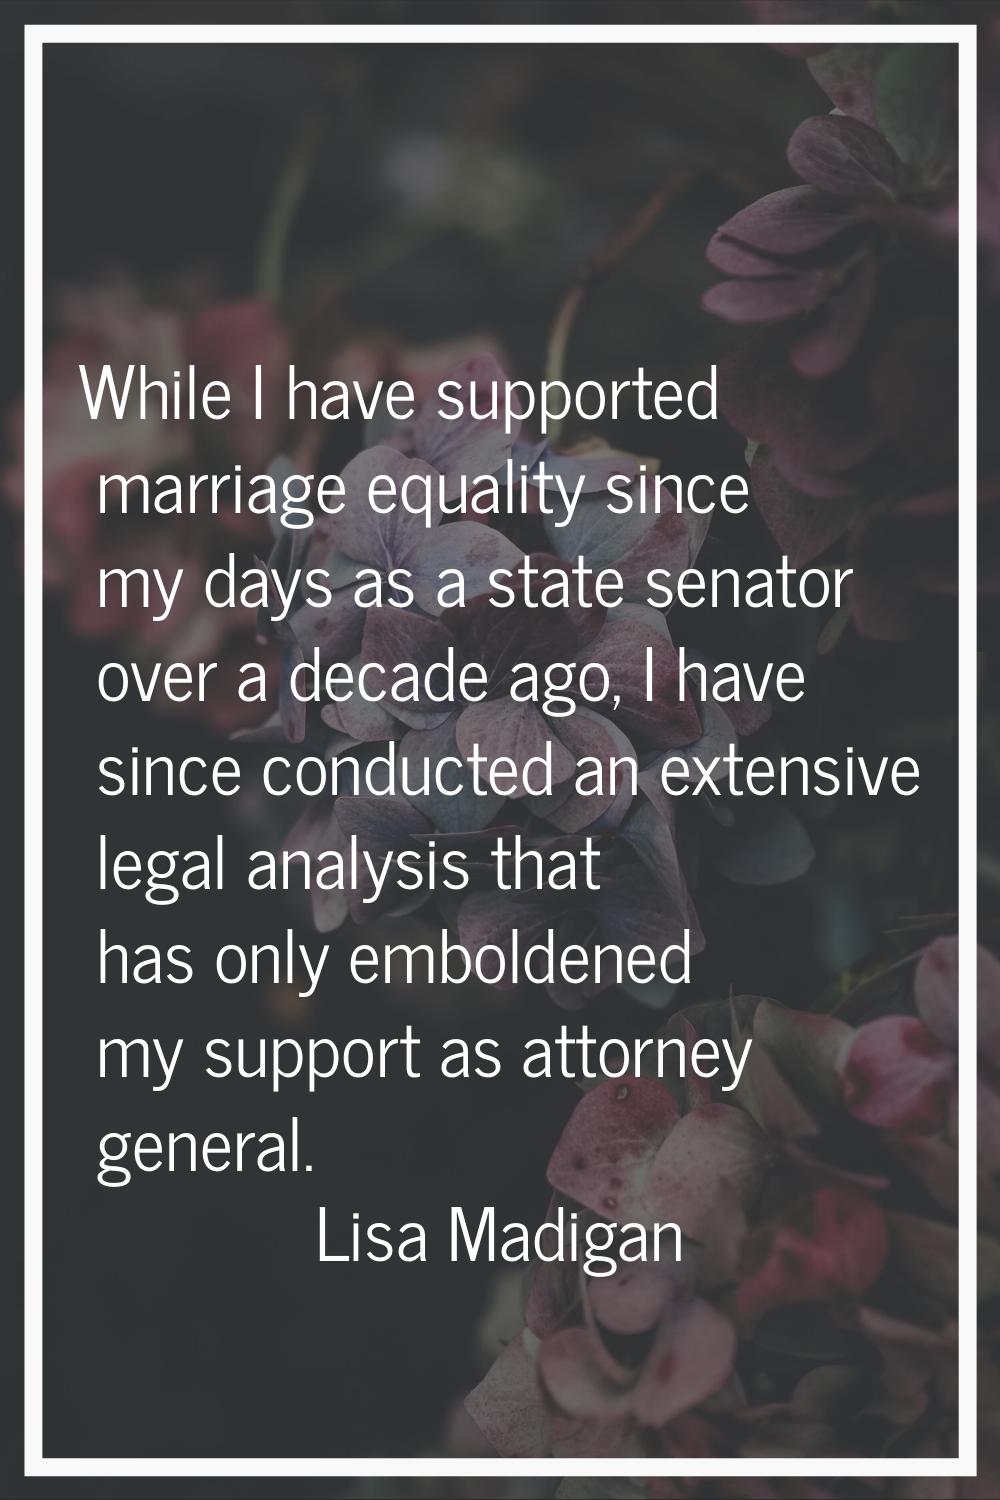 While I have supported marriage equality since my days as a state senator over a decade ago, I have